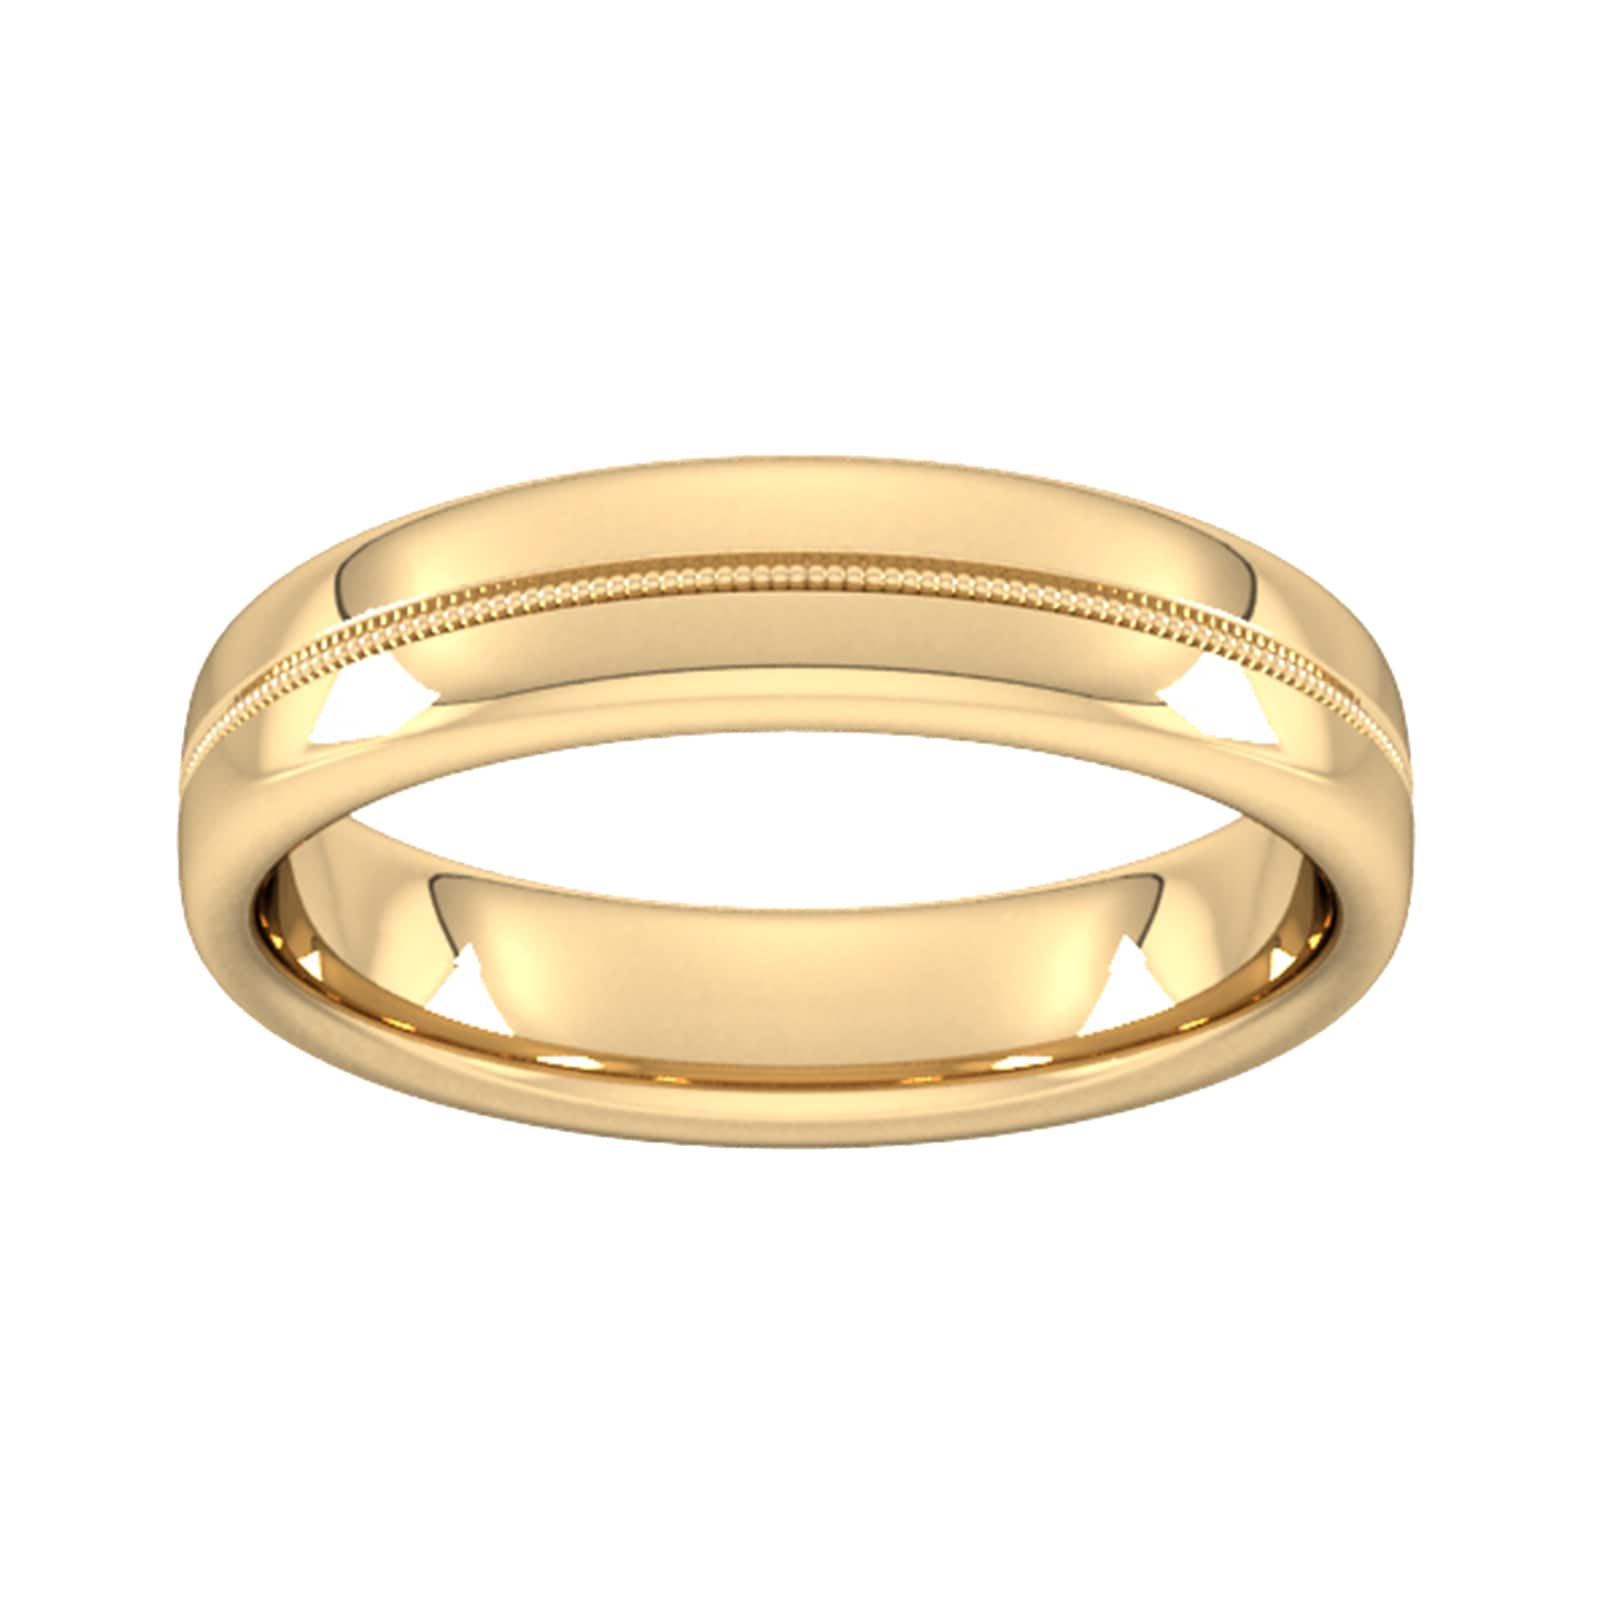 5mm Flat Court Heavy Milgrain Centre Wedding Ring In 18 Carat Yellow Gold - Ring Size N